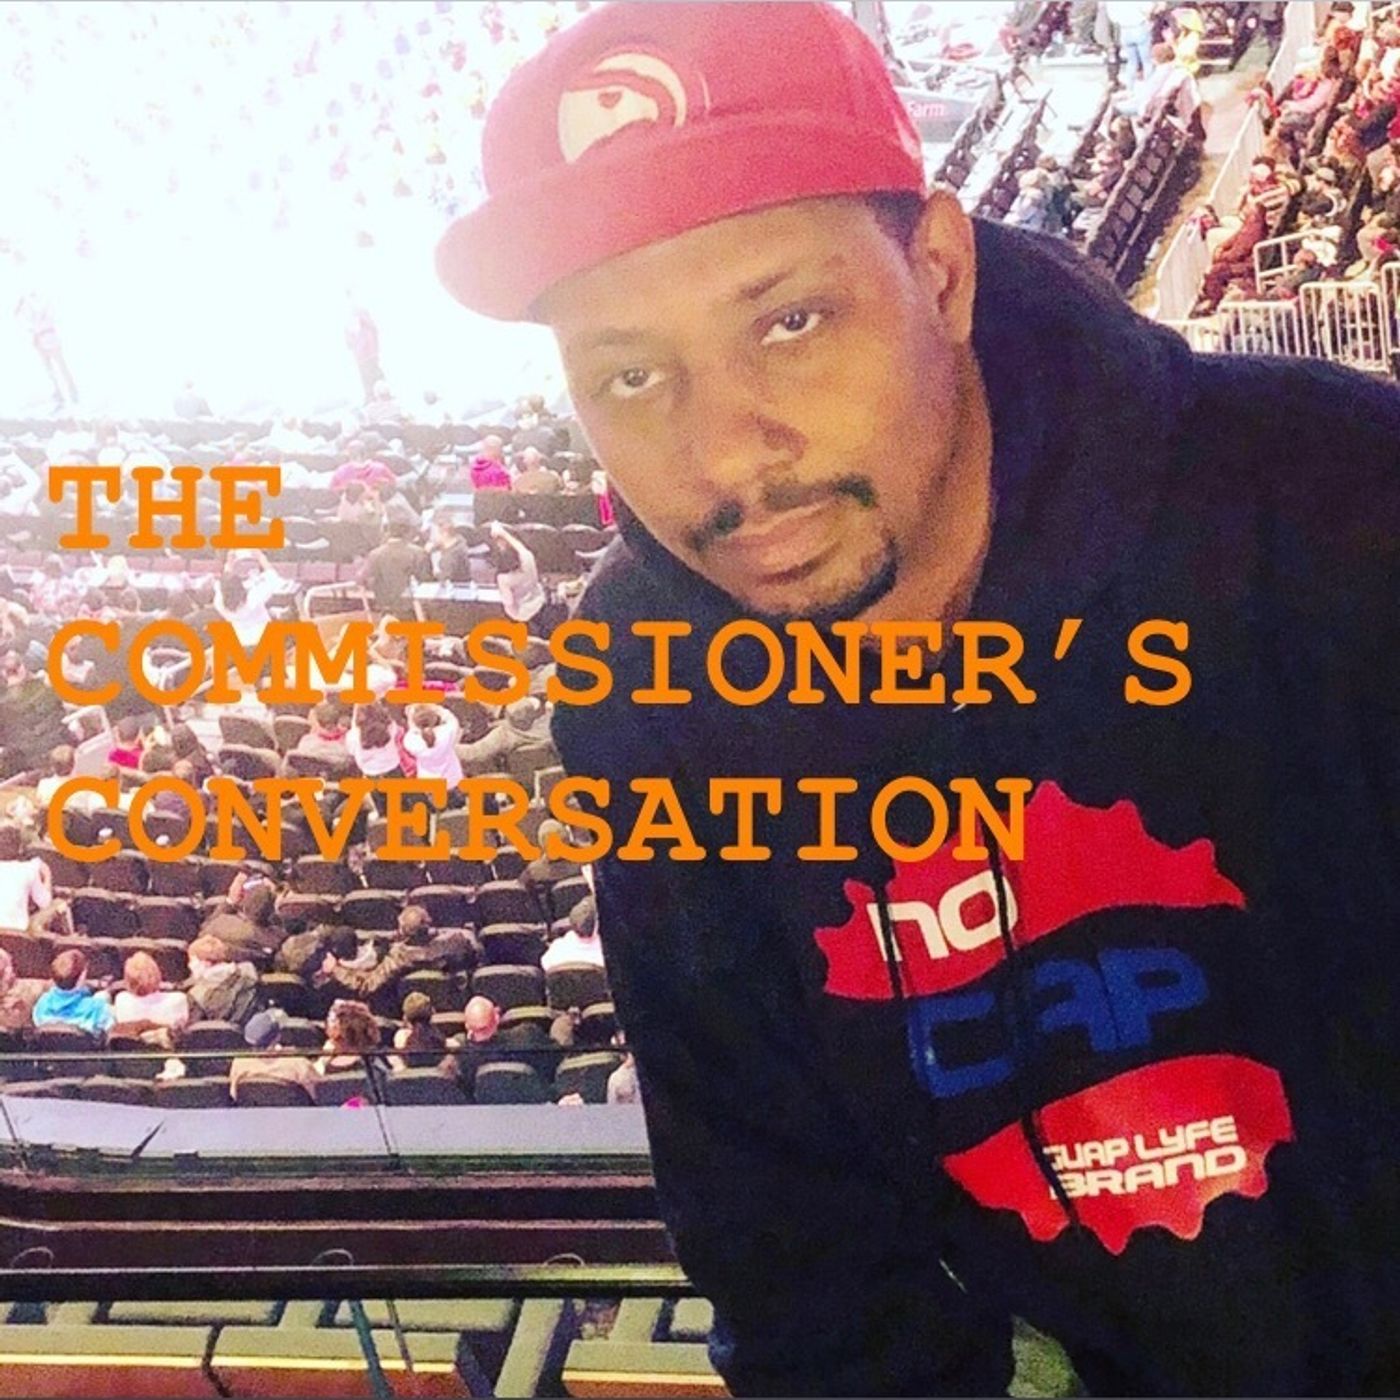 S2 Ep43: The Commissioner's Conversation with JR SportBrief